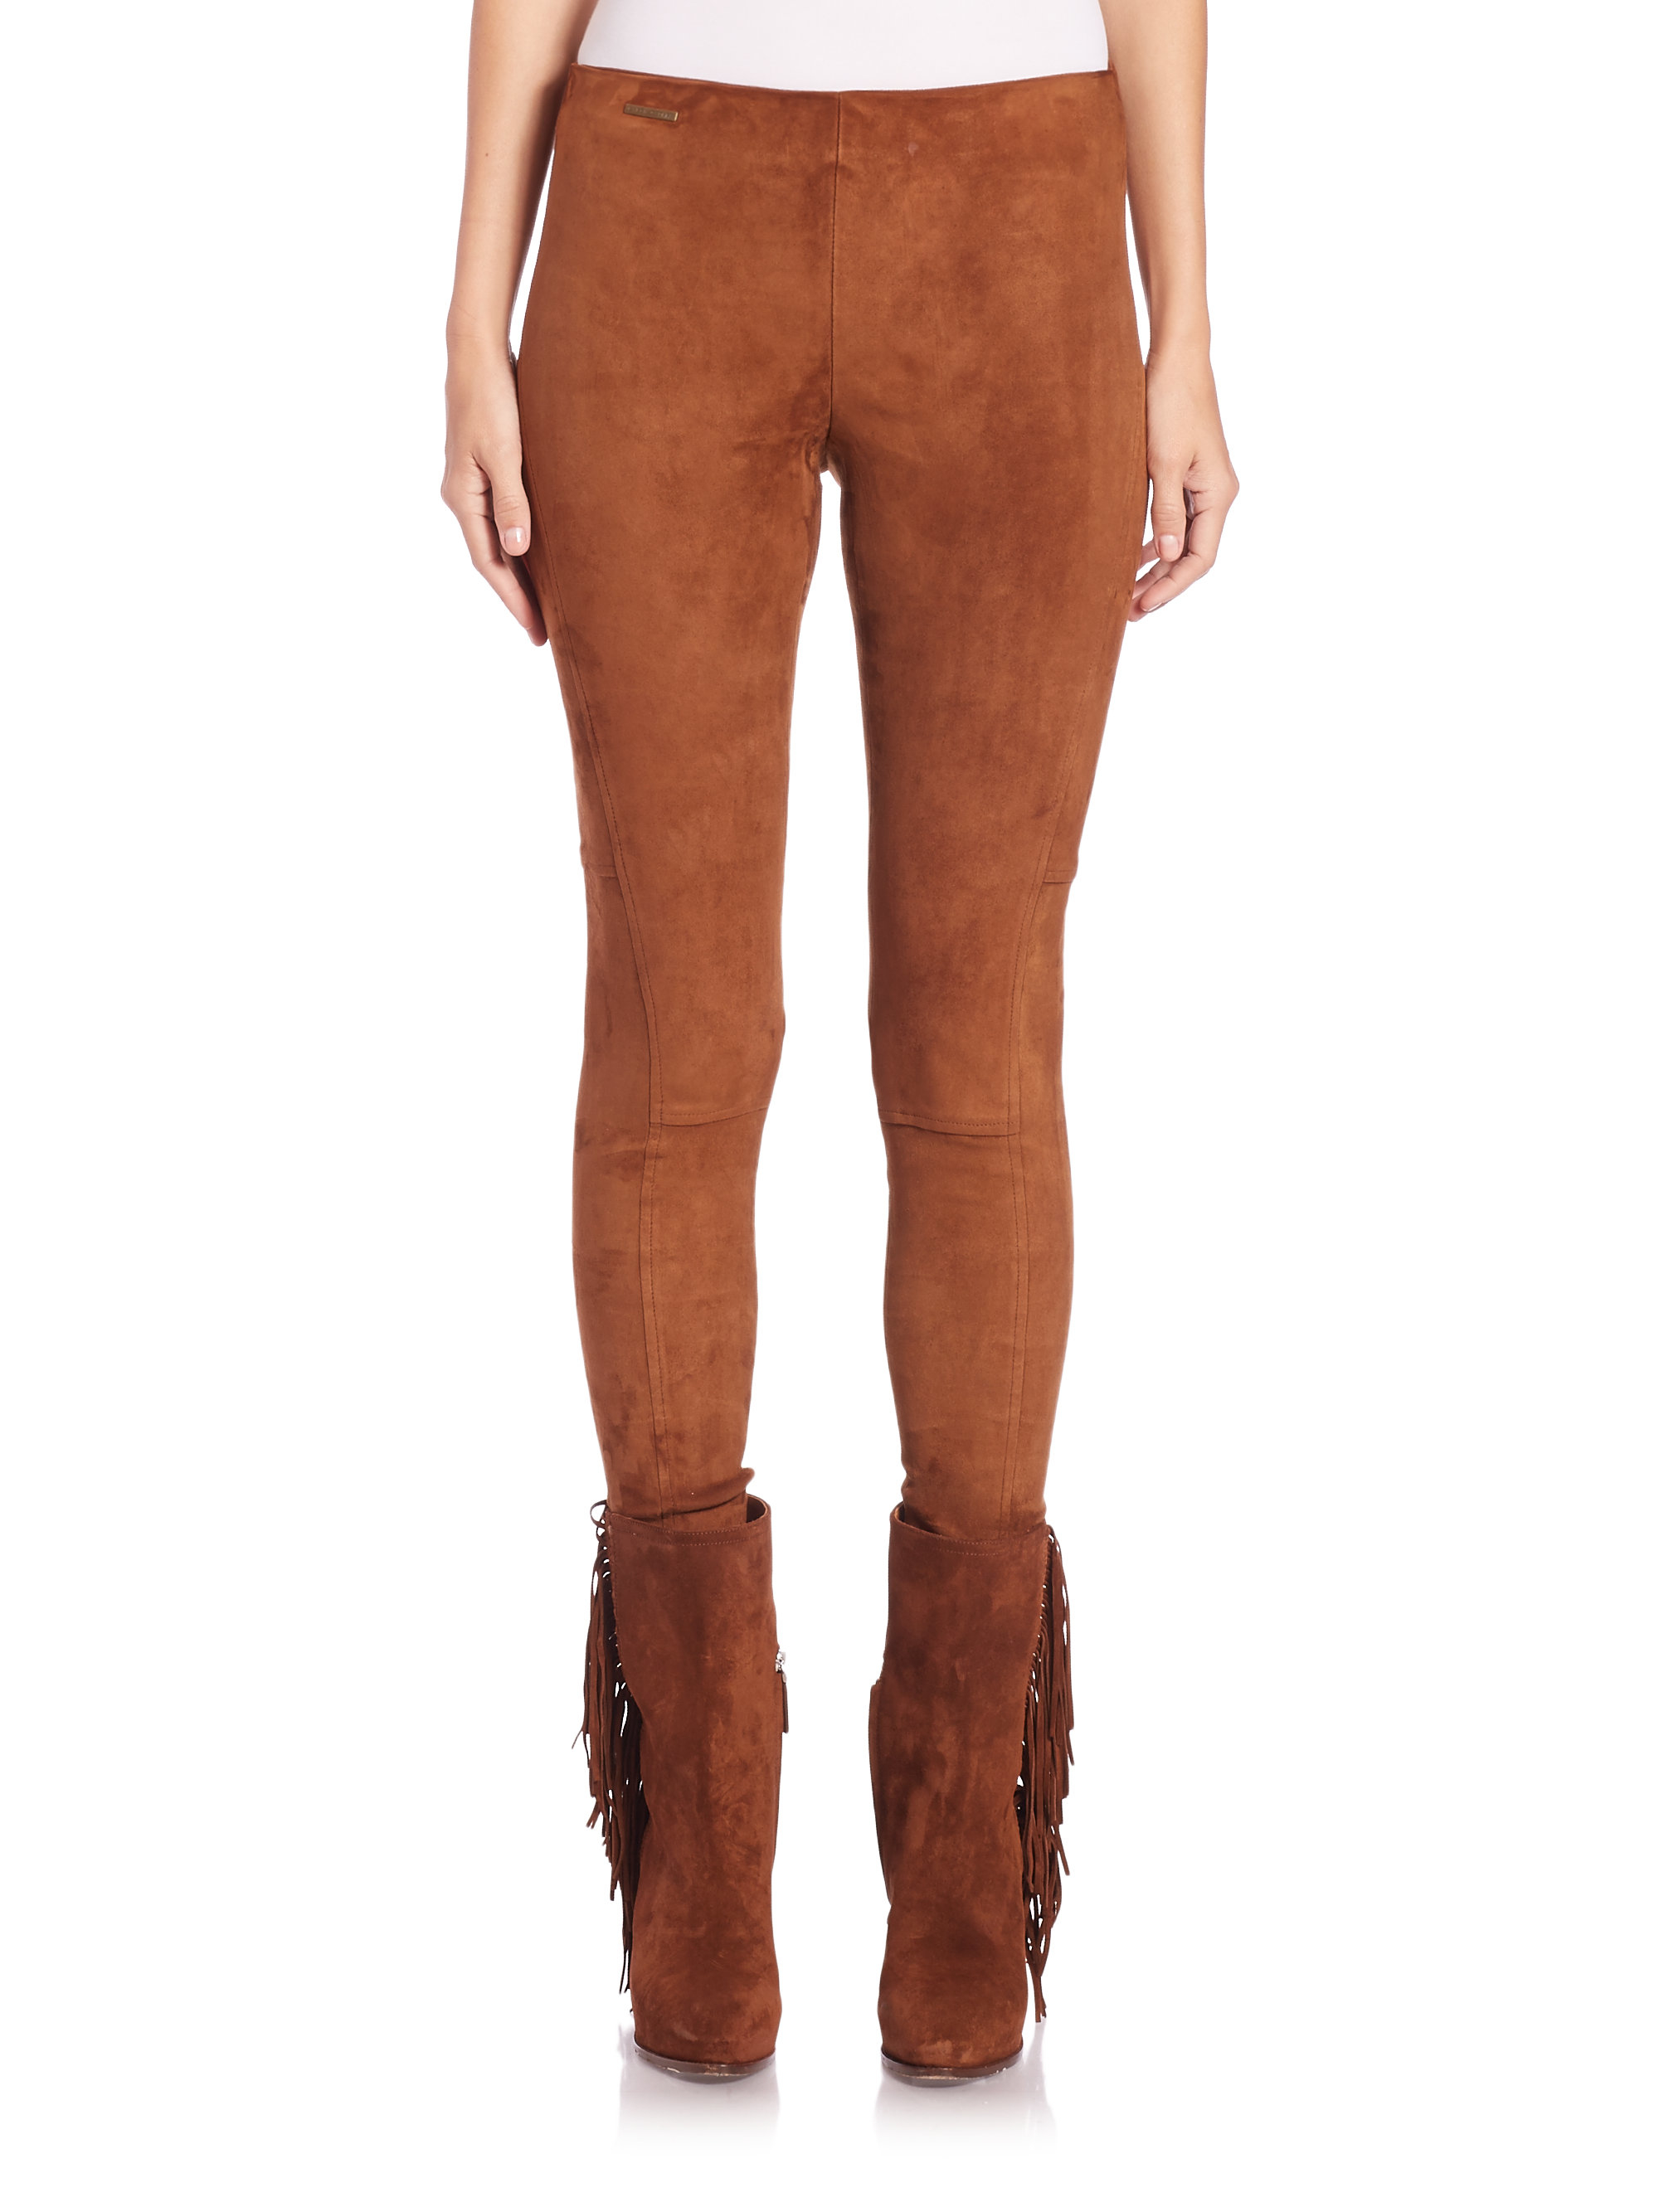 Lyst - Polo Ralph Lauren Stretch Suede Skinny Pants in Brown